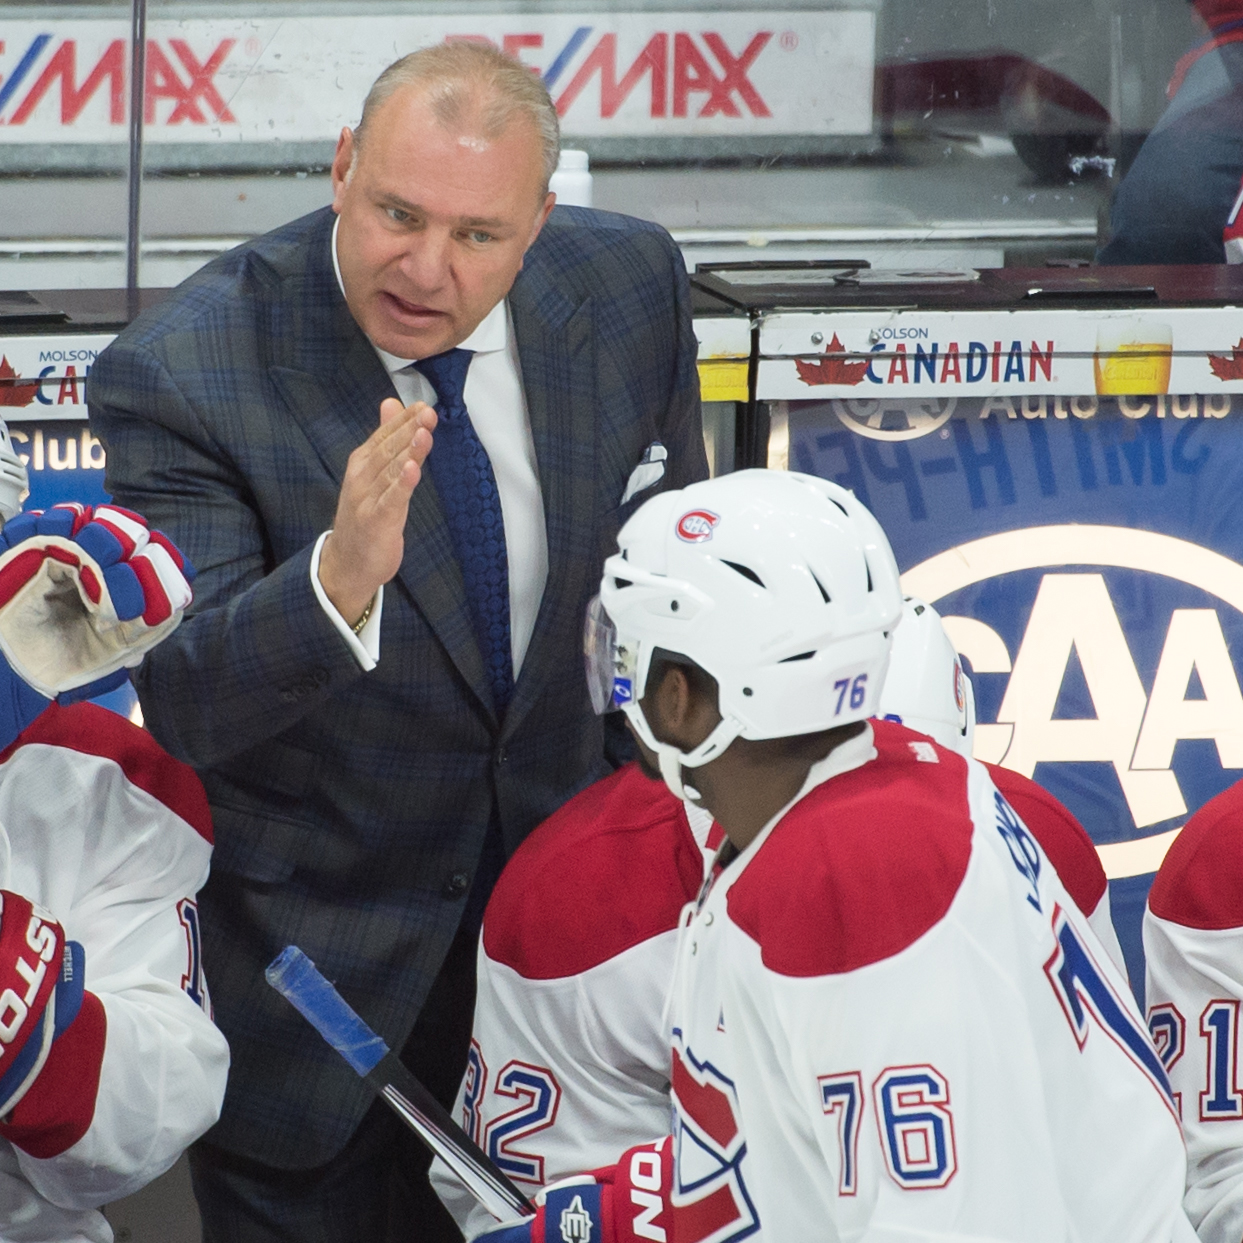 Therrien offers some instructions for Subban